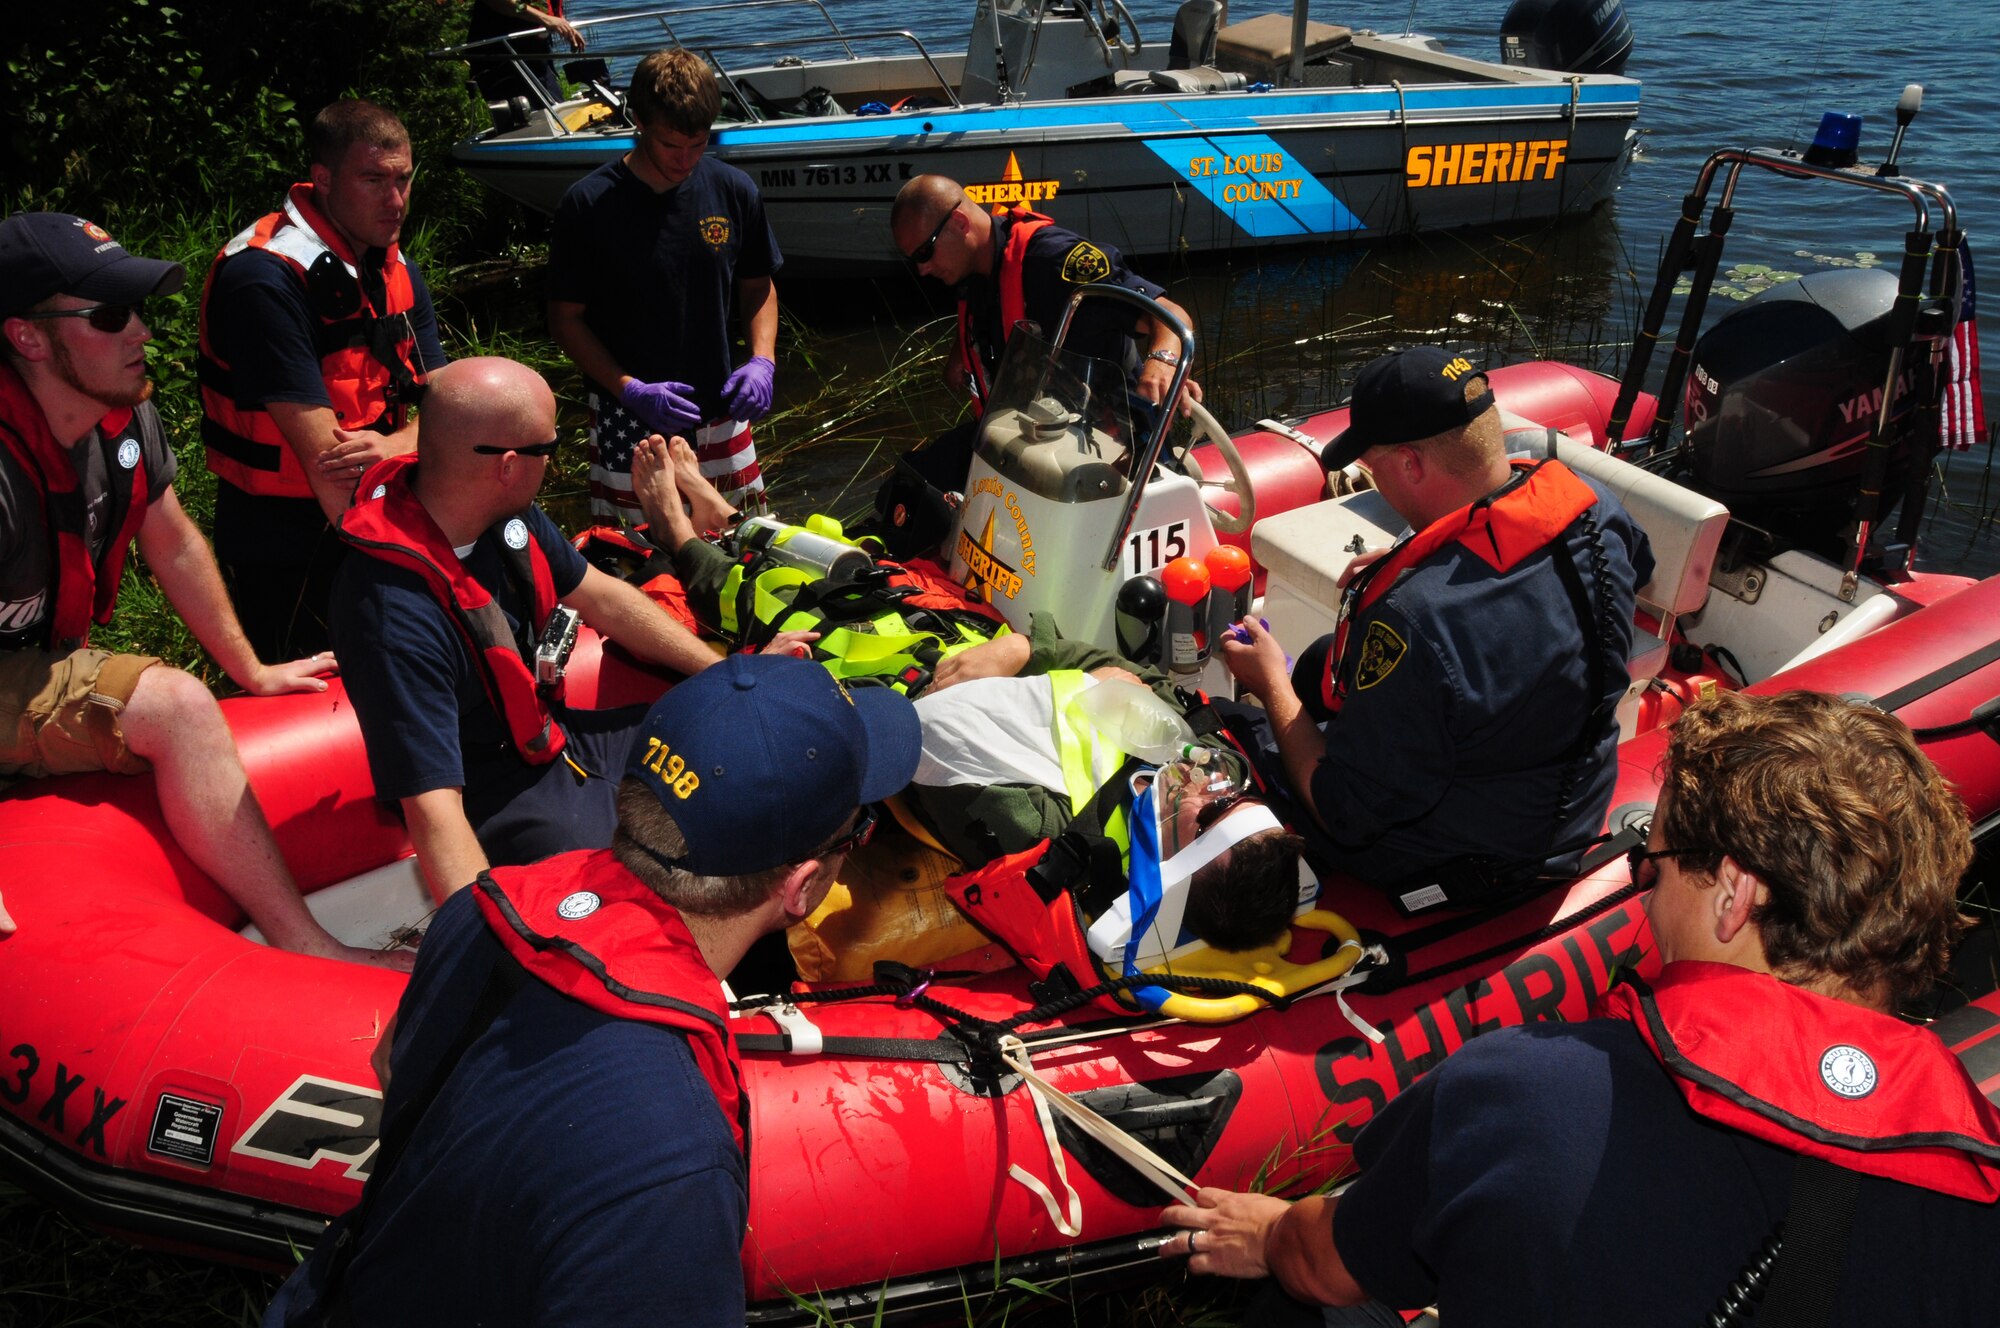 Members of the St. Louis County Rescue Squad prepare Capt. David A. Betts for transport during a major accident response exercise at Fish Lake, Duluth, Minn. July26, 2011.  The exercise simulated rescuing a pilor after an F-16 crashed into a lake.  (U.S. Air Force photo by Tech. Sgt. Scott G. Herrington)